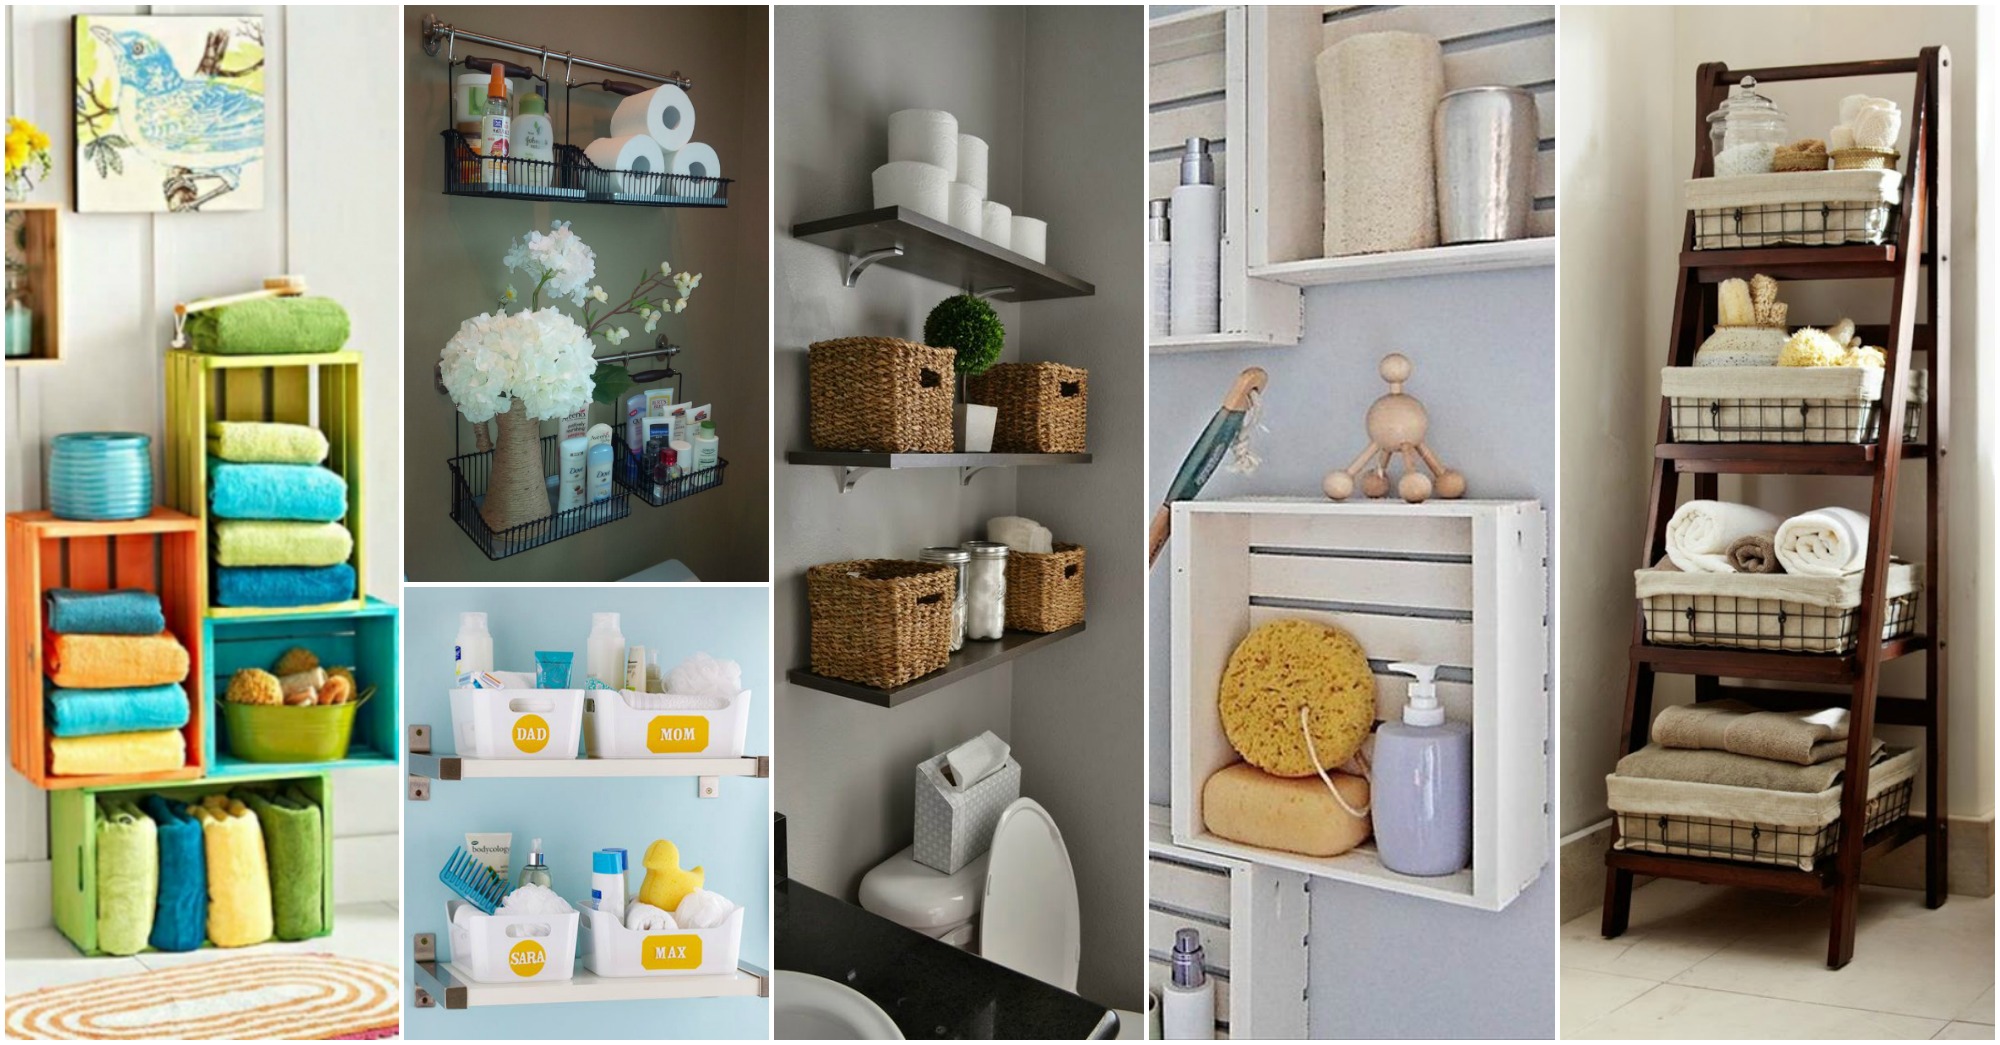 16 Tips For Bathroom Storage Ideas That Will Help You A Lot